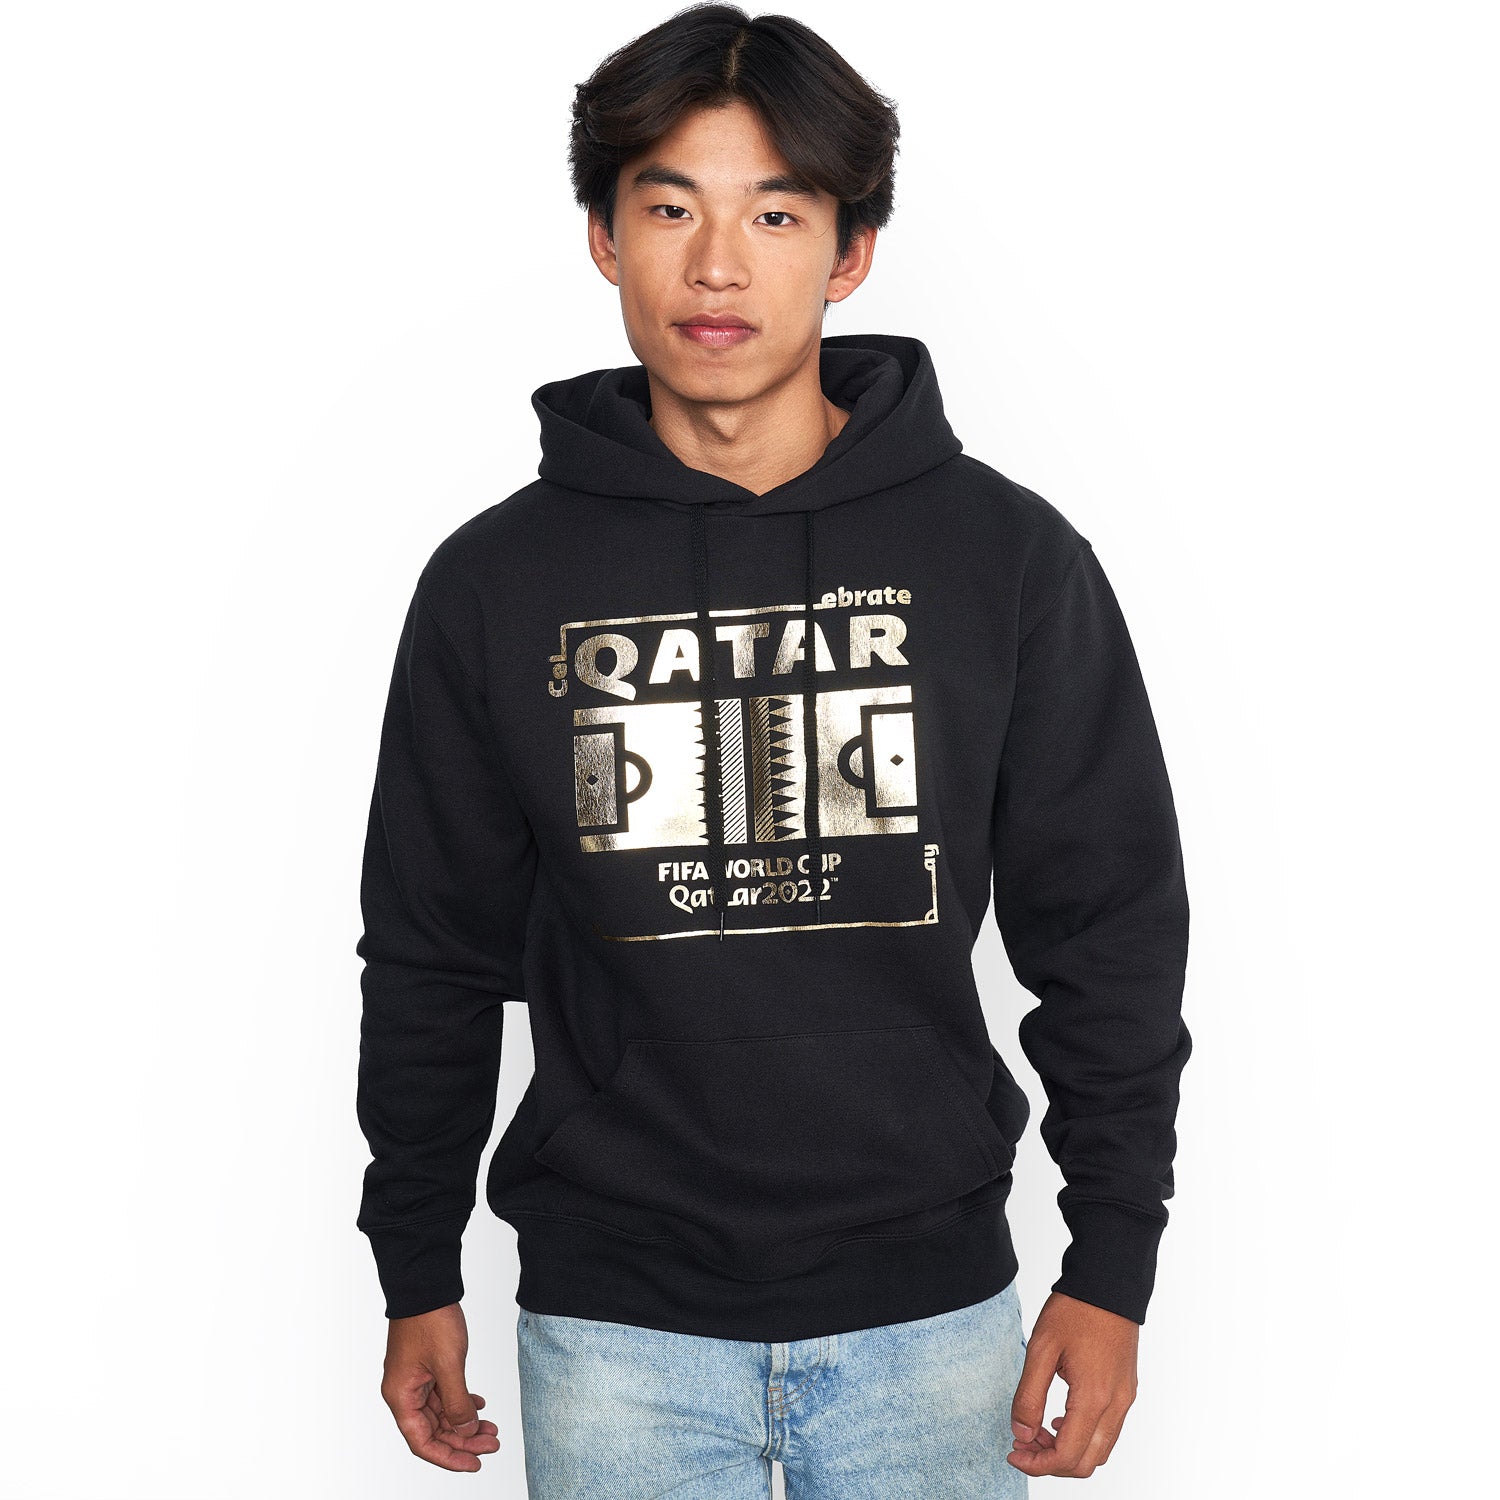 FIFA Classics South Africa '10 Hoodie Black – Men's - Official